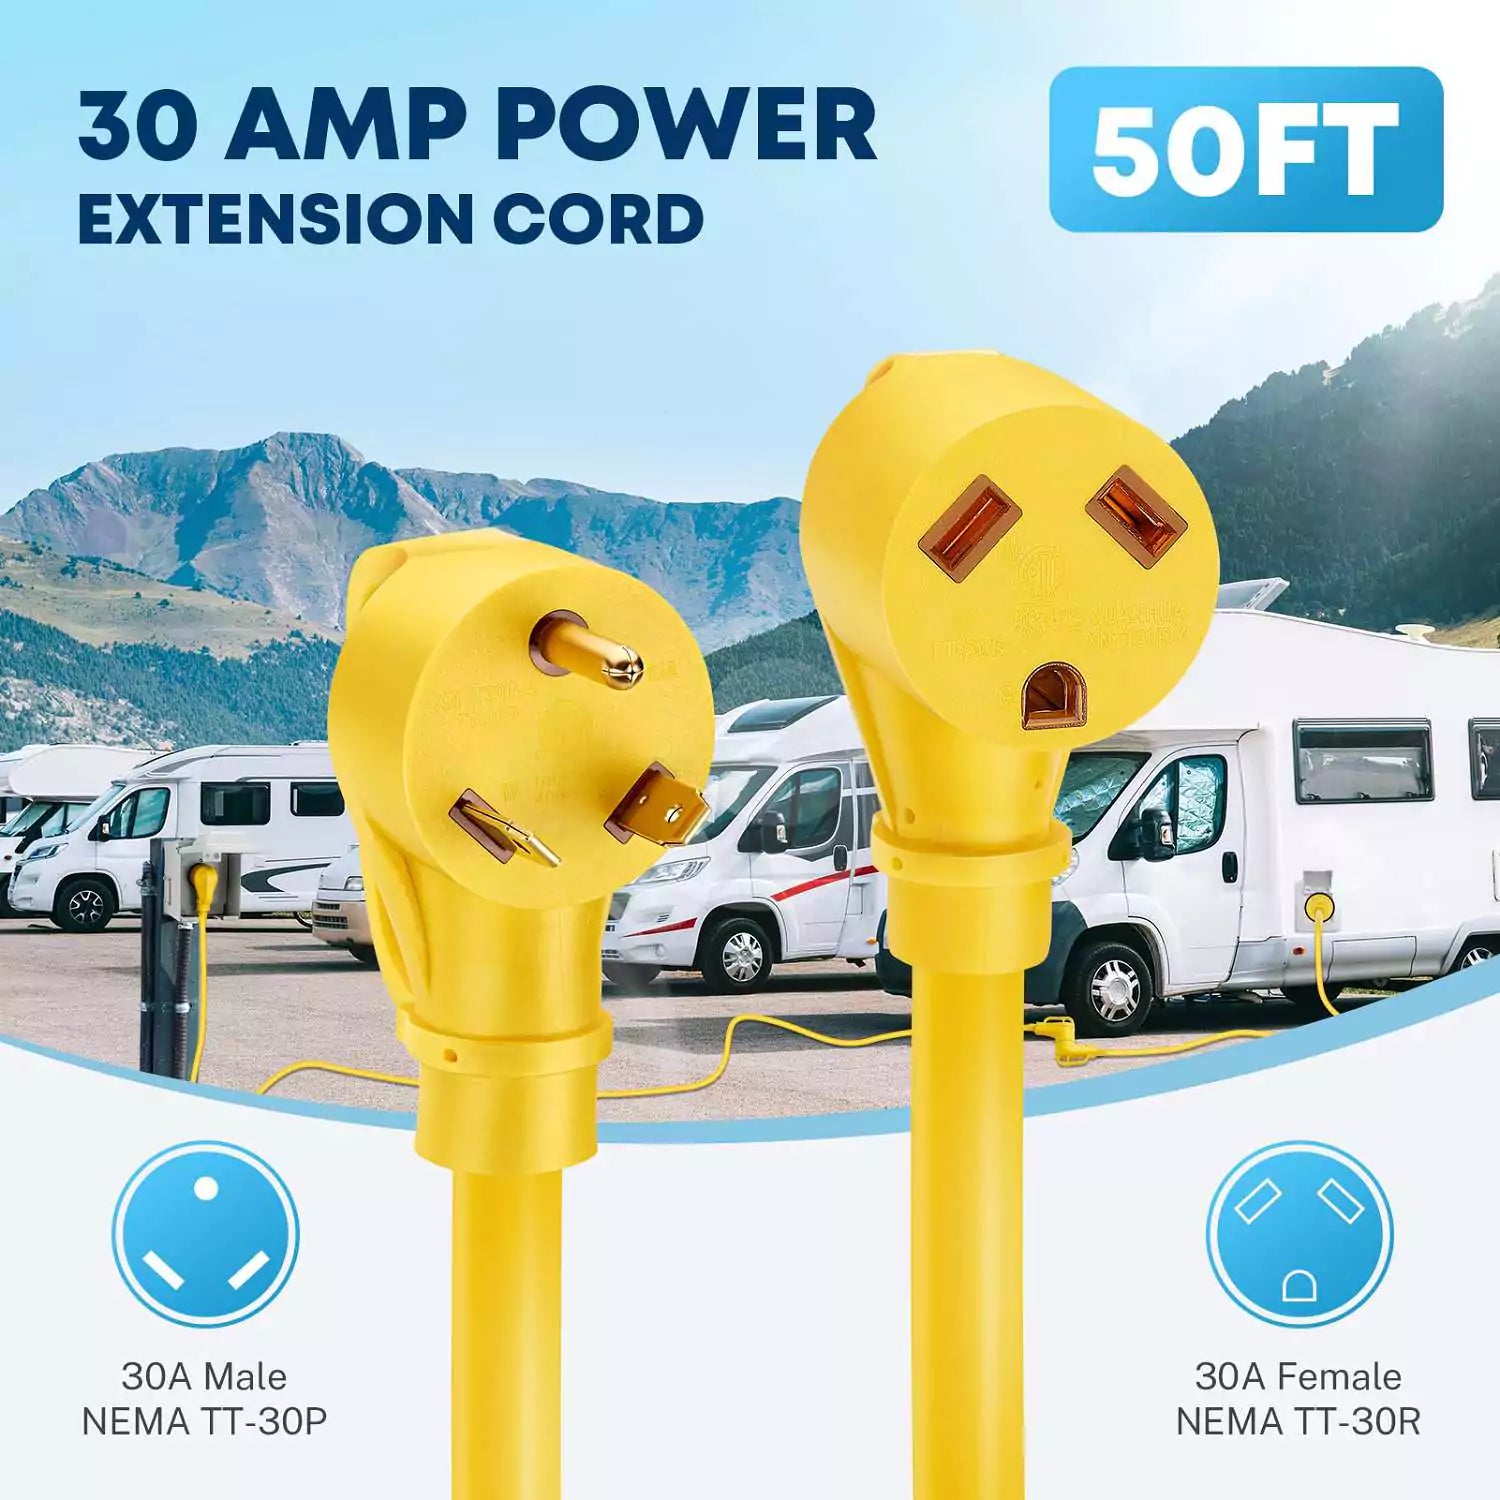 30 amp extension cord